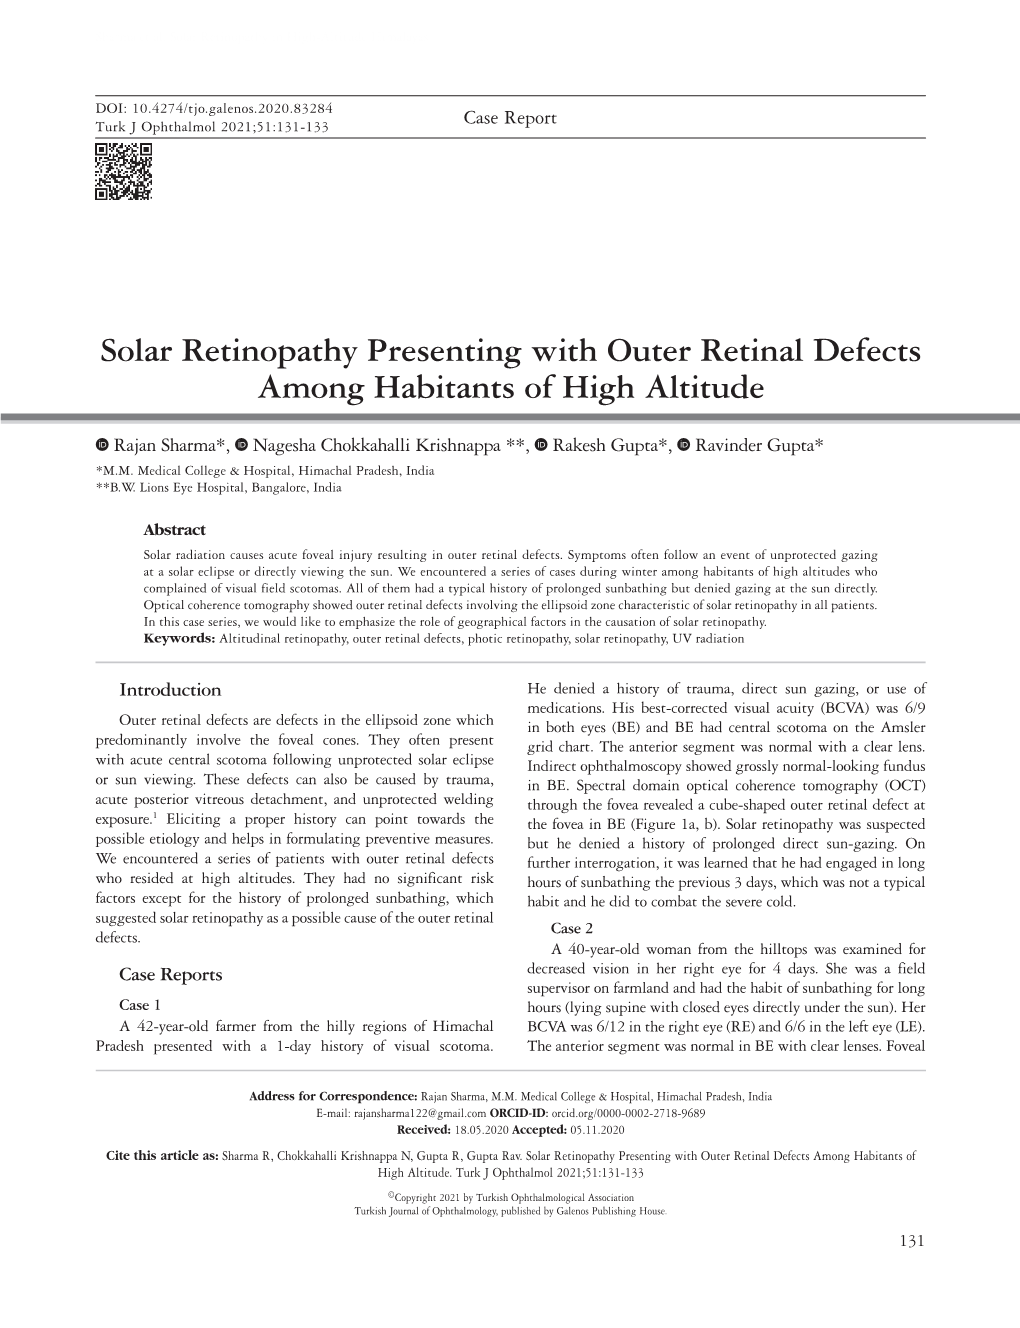 Solar Retinopathy Presenting with Outer Retinal Defects Among Habitants of High Altitude